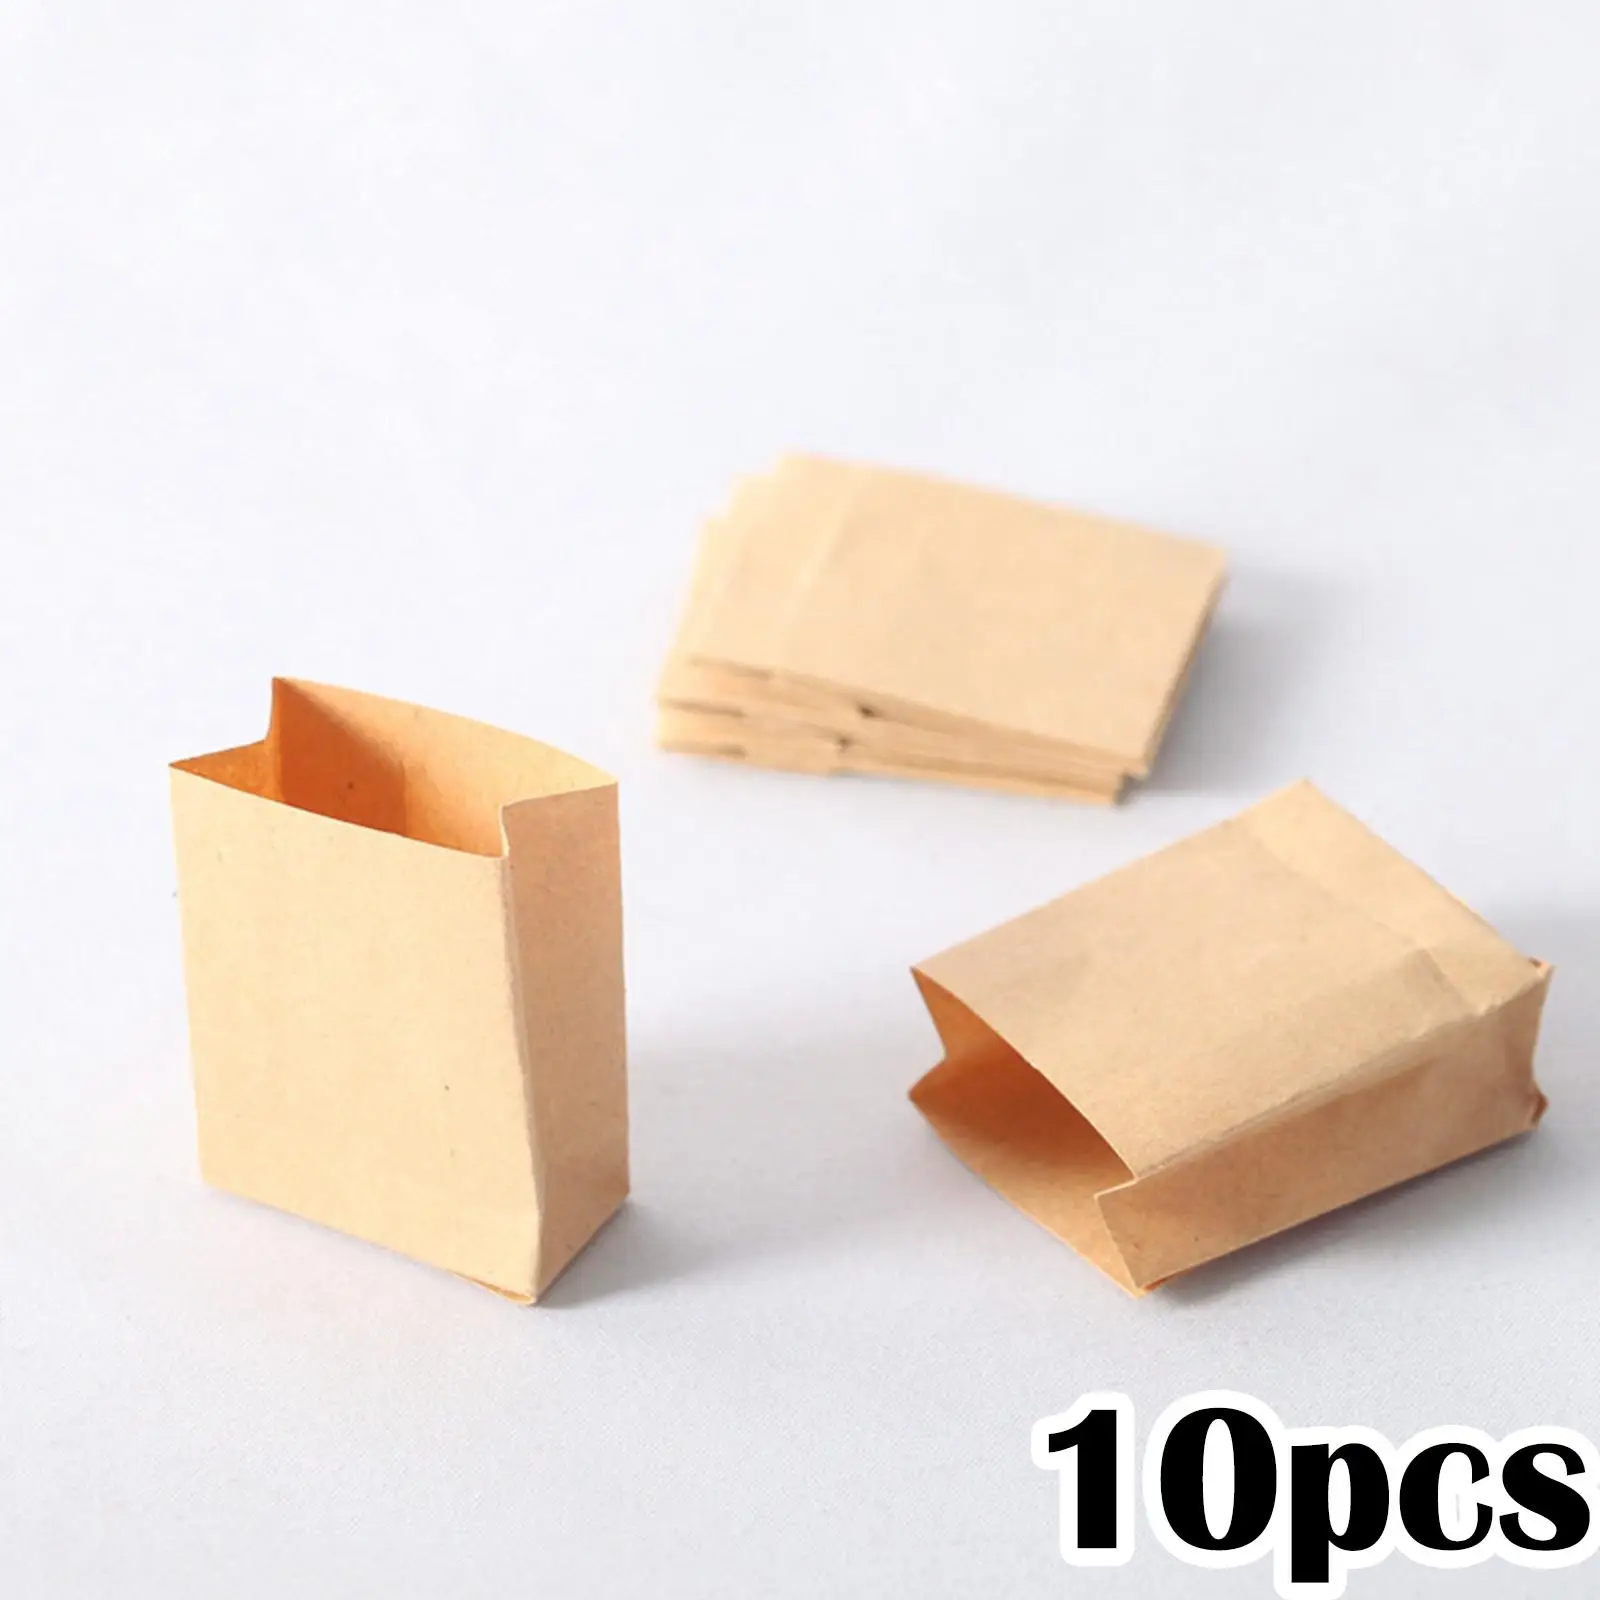 10 Pieces Mini Bread Bag Brown Paper Lunch Bags Snack Bags for 1:12 Dollhouse Bakery Shop Decor Kitchen Playset Creative Toys